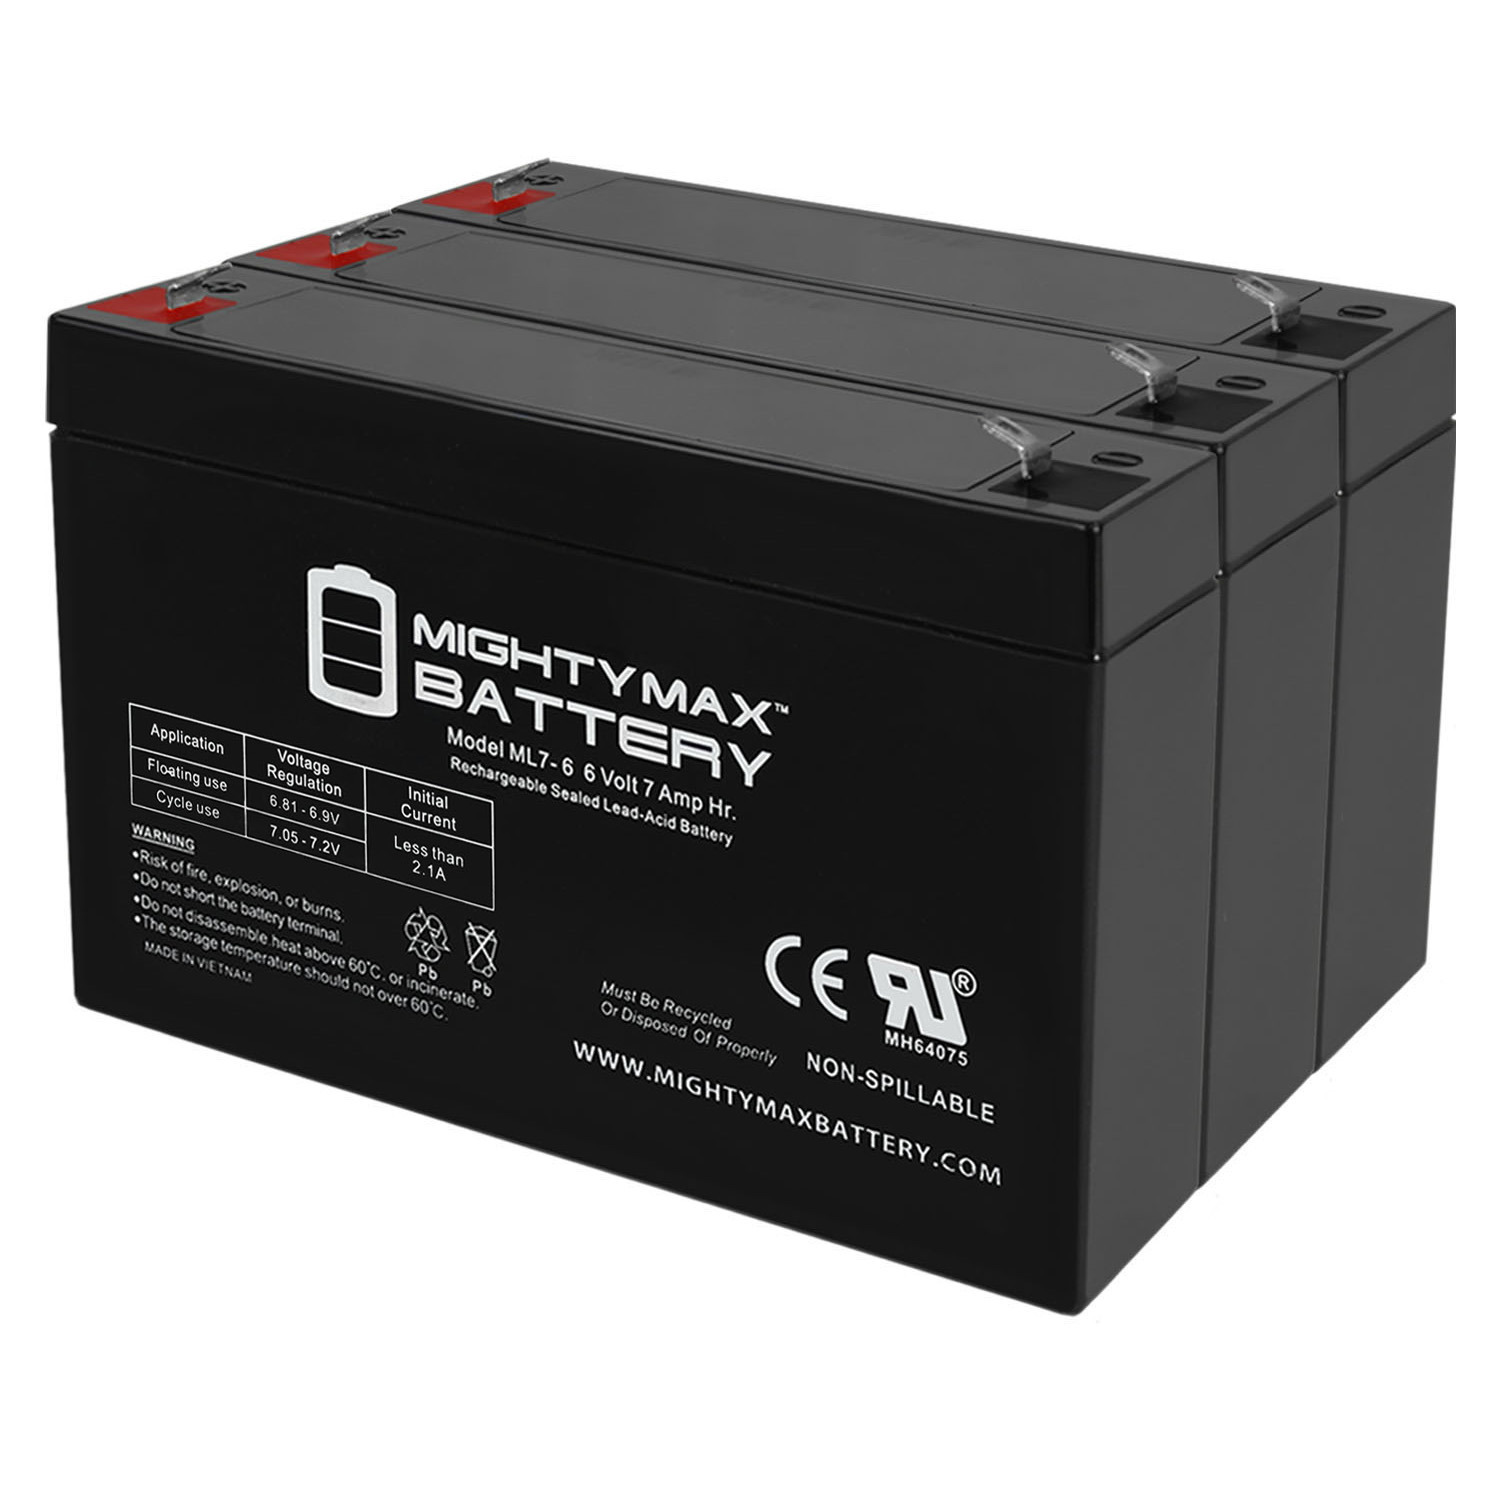 6V 7Ah SLA Replacement Battery for Sure-Lites AA1, A12 - 3 Pack